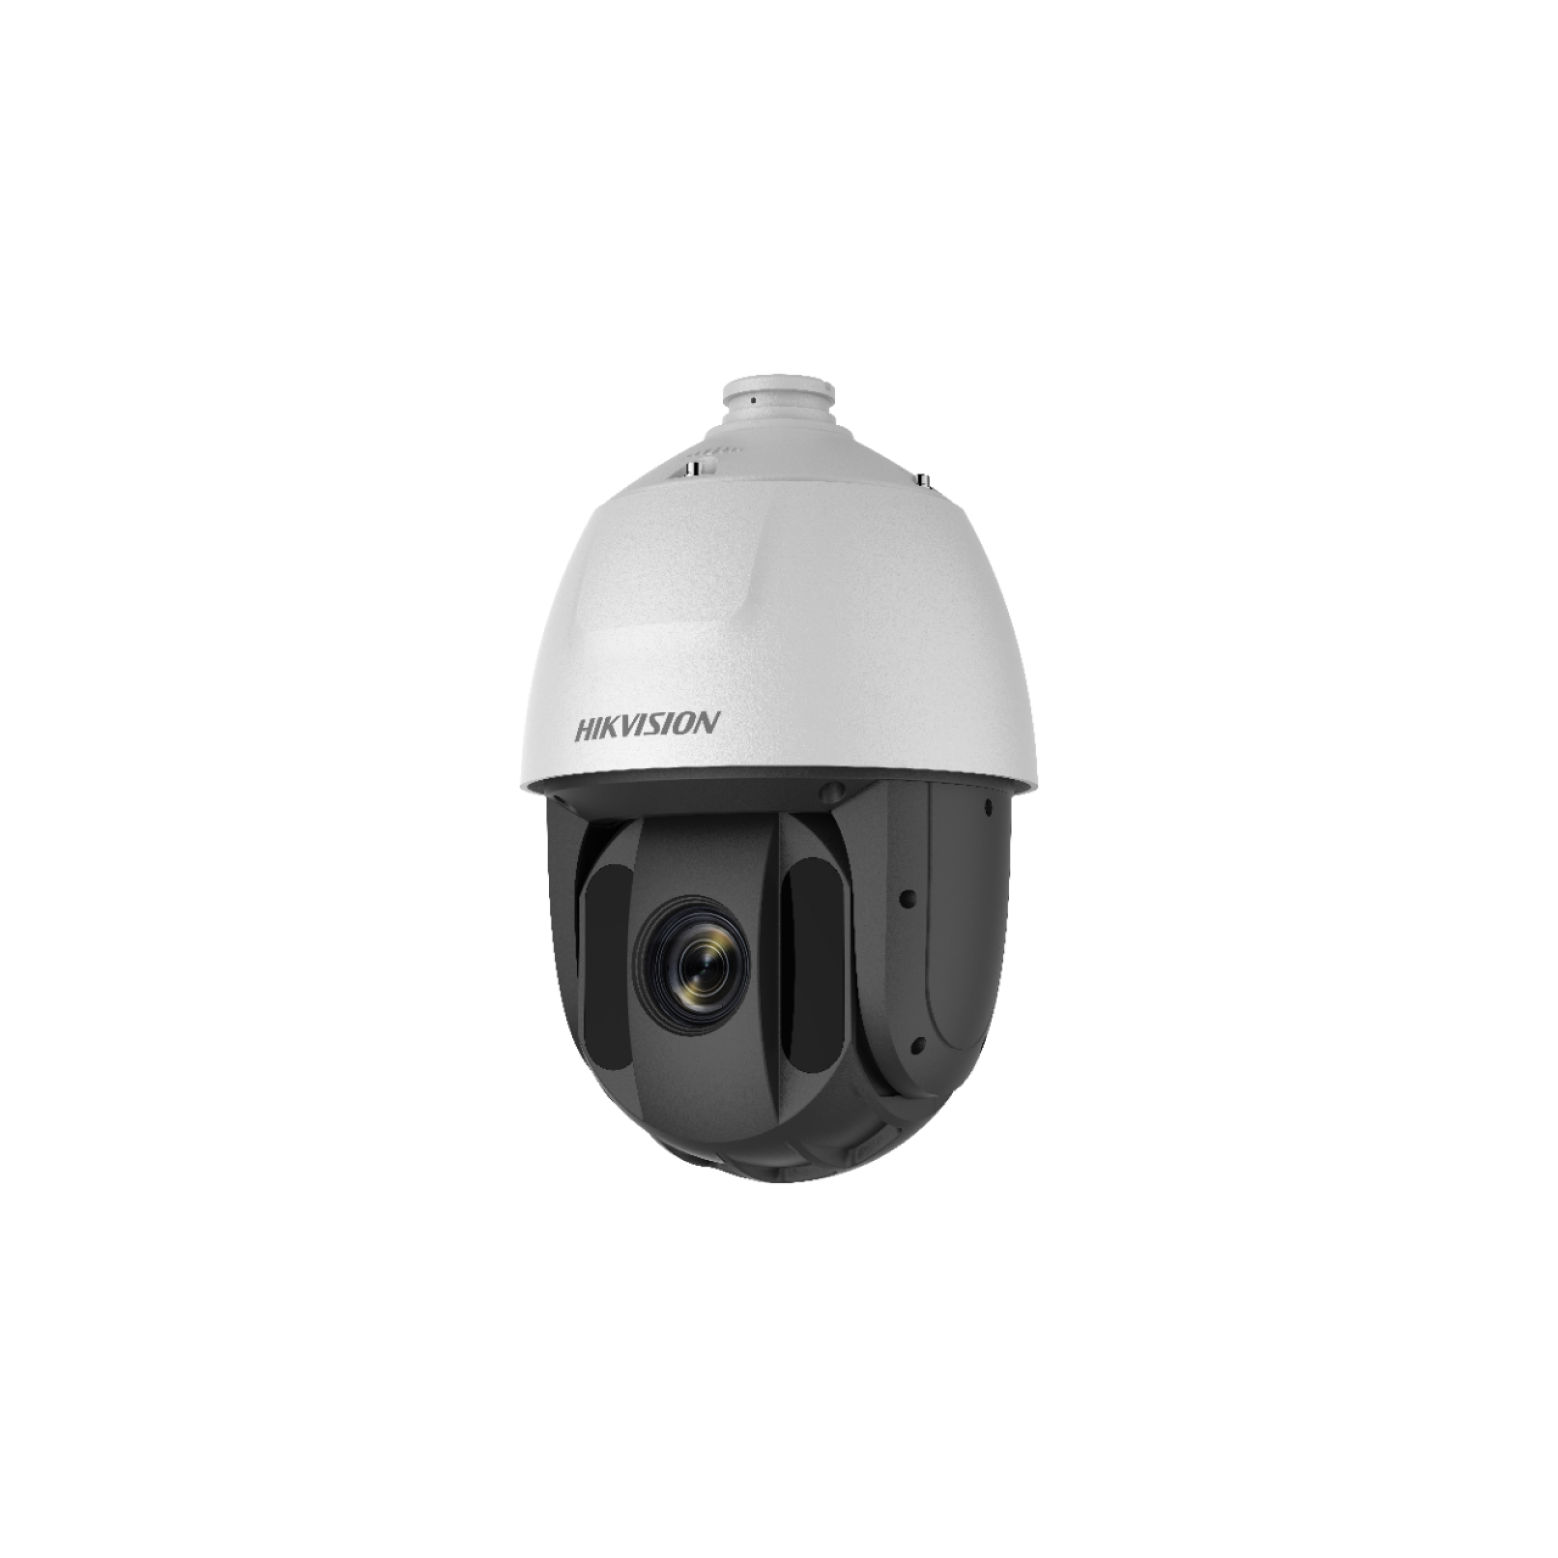 Hikvision DS-2DE5425IW-AE Pro Series, DarkFighter IP66 4MP 4.8-120mm Motorized Varifocal Lens, IR 150M 25 x Optical Zoom IP Speed Dome Camera, Wit